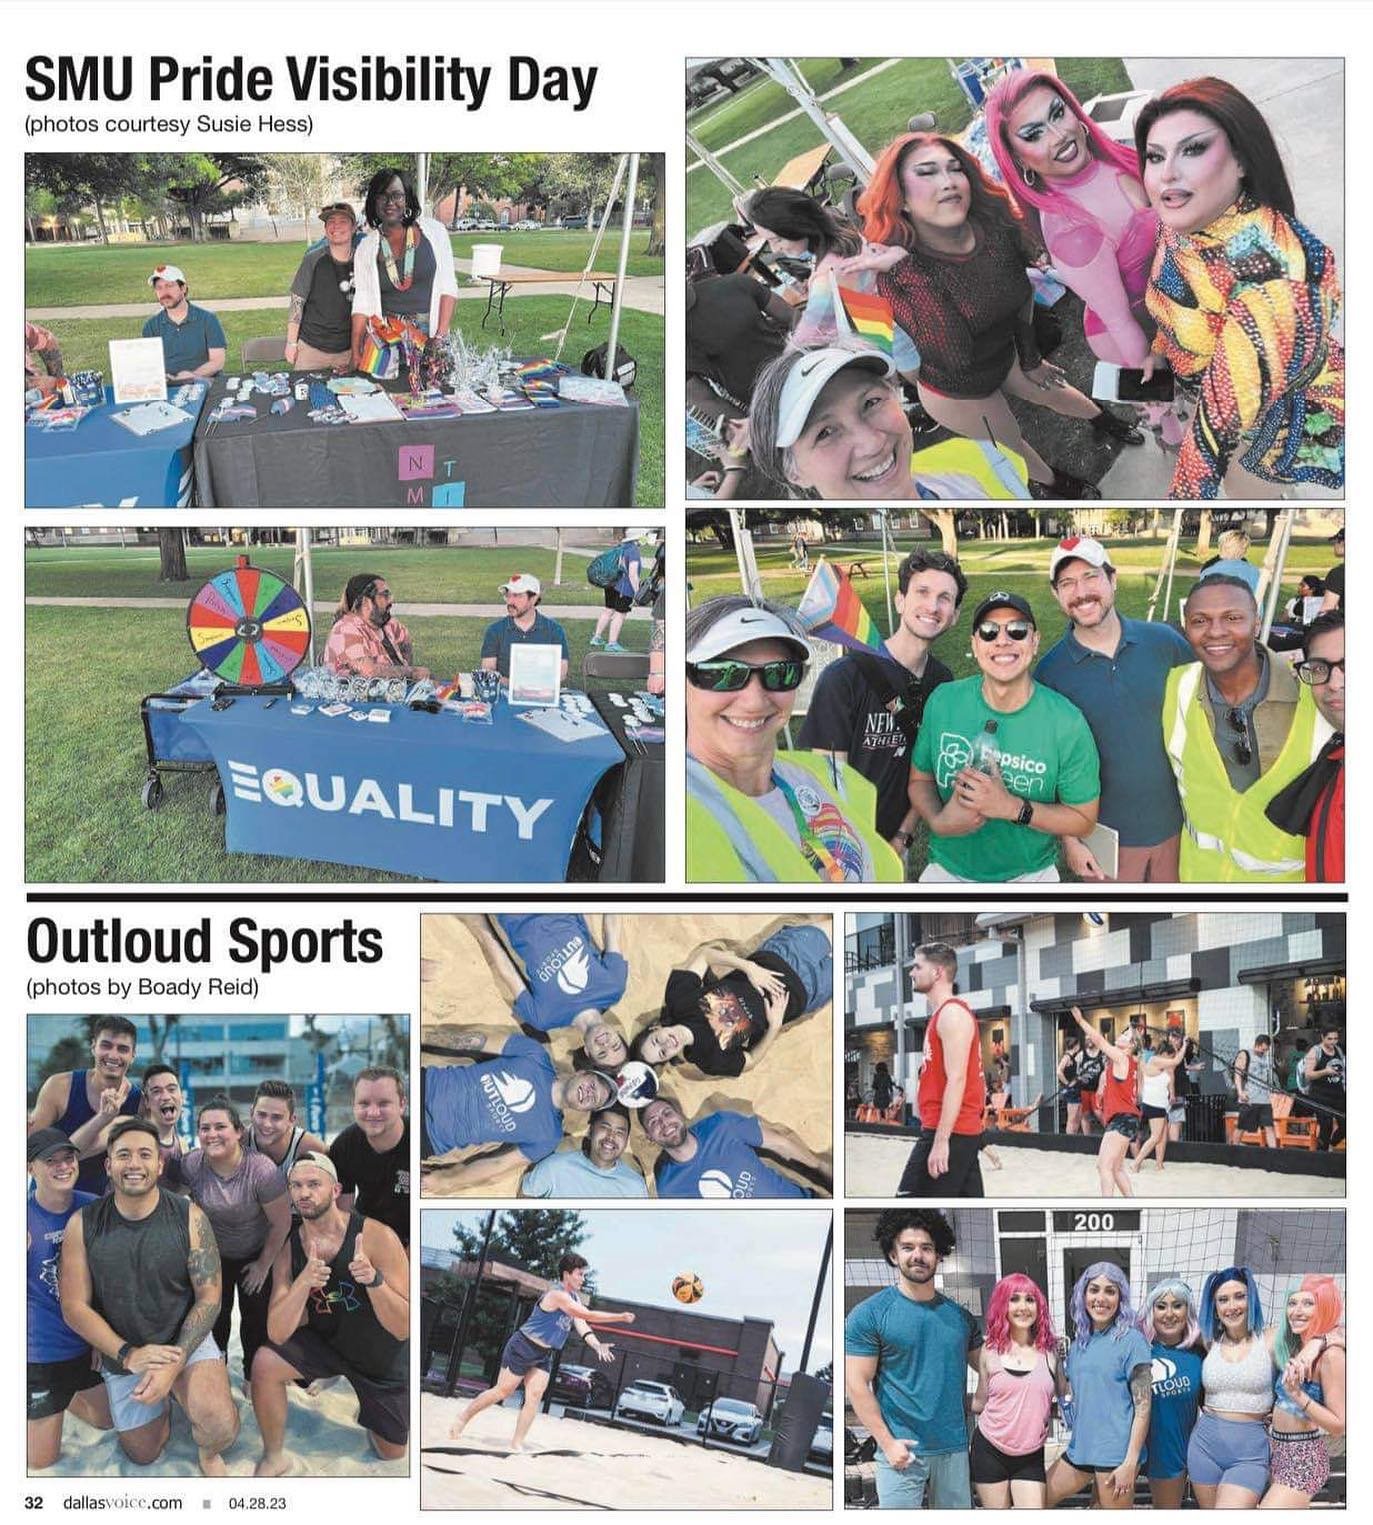 Check out Outloud Sports in this weeks Scene Section of the Dallas Voice!